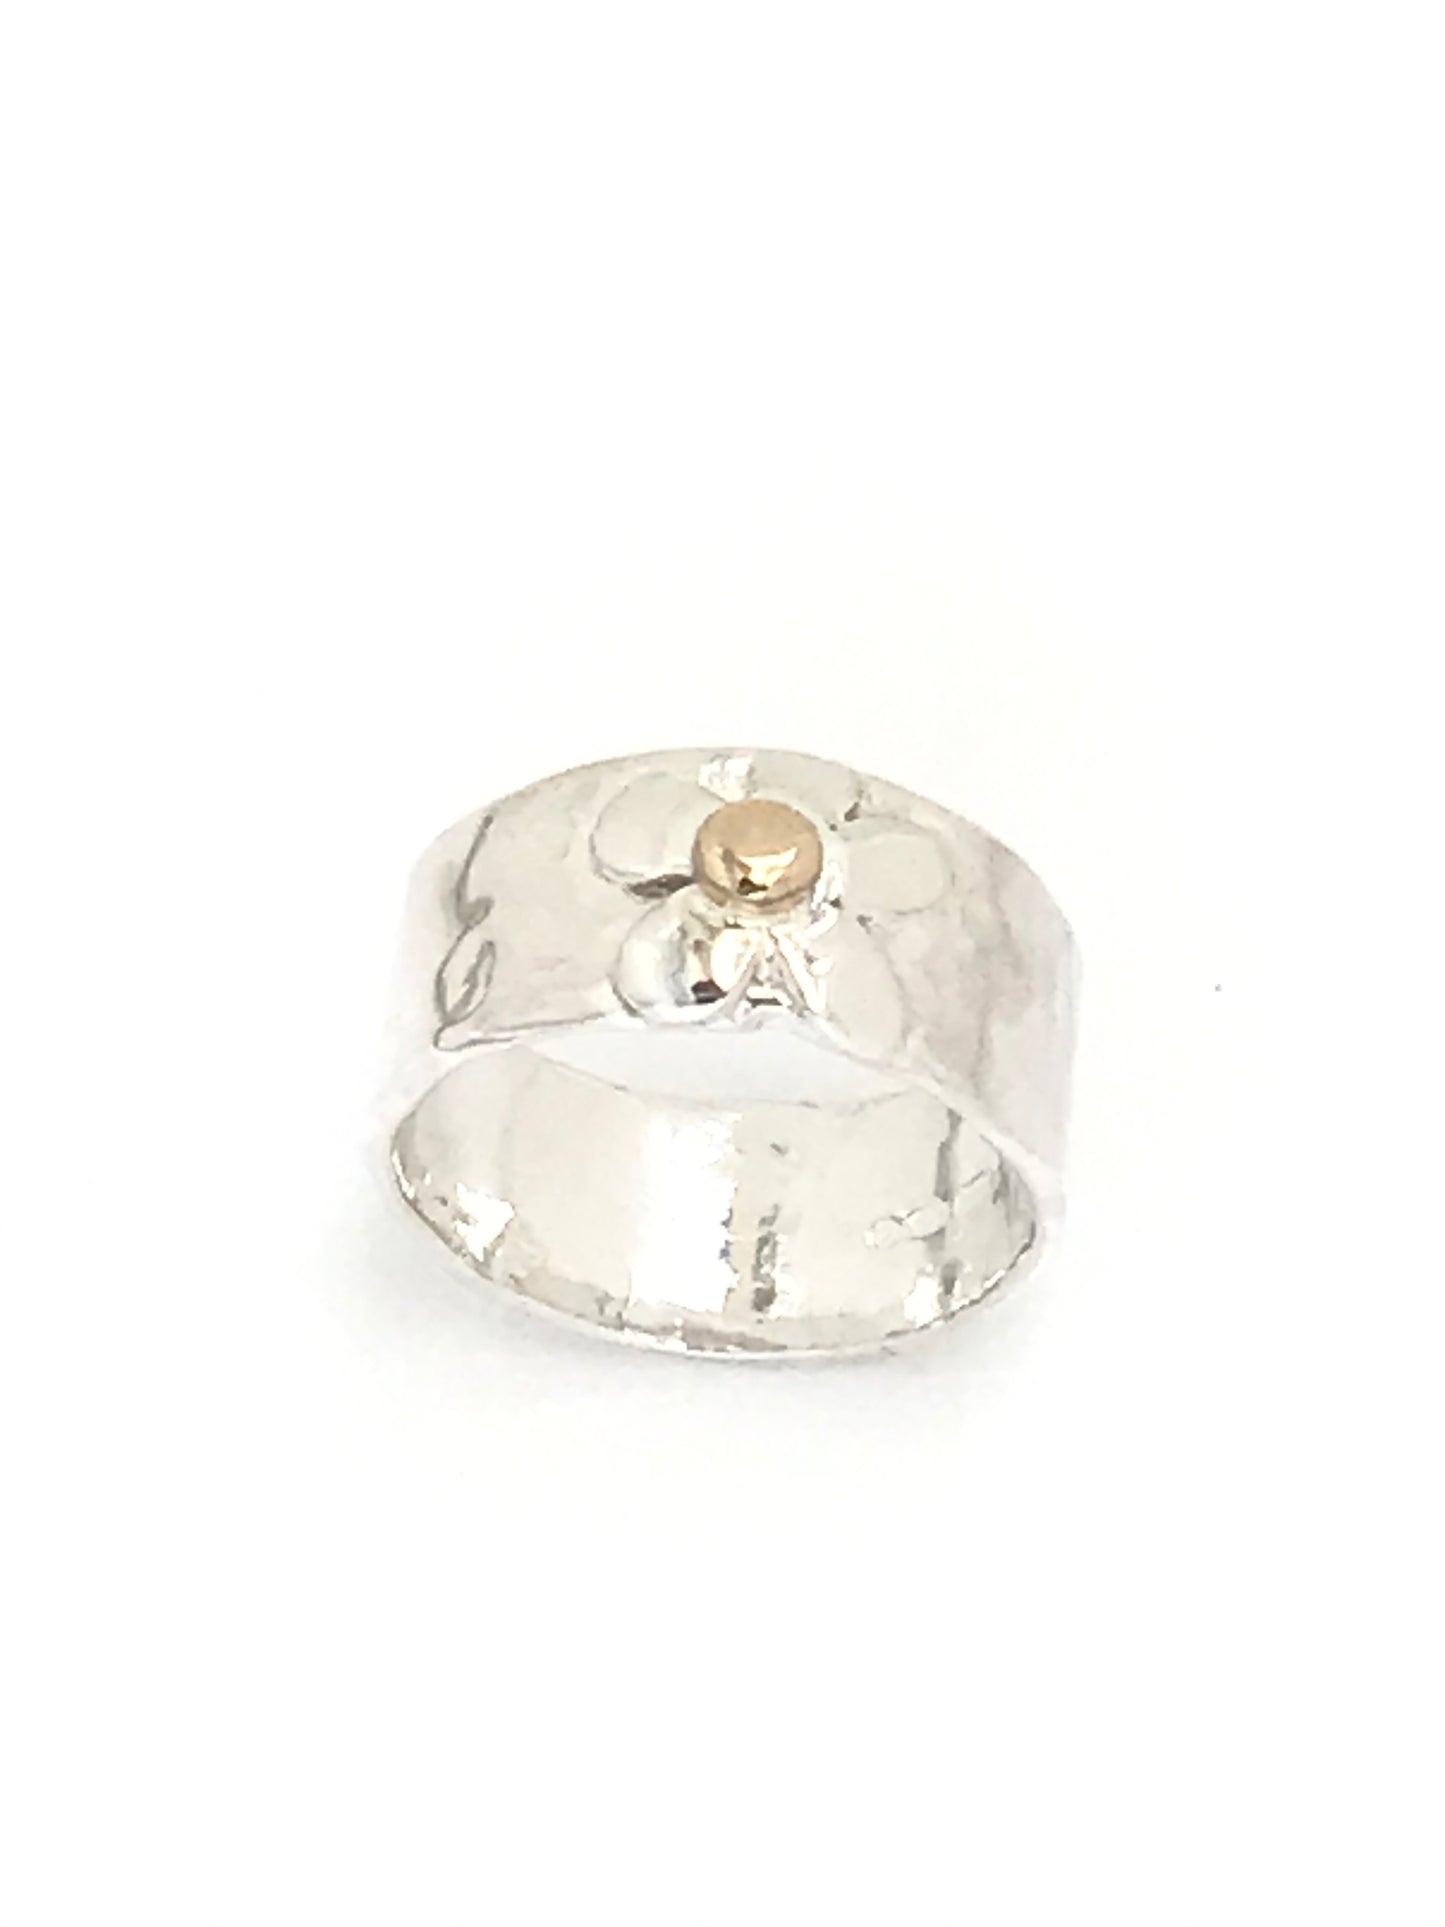 Silver and gold band flower ring